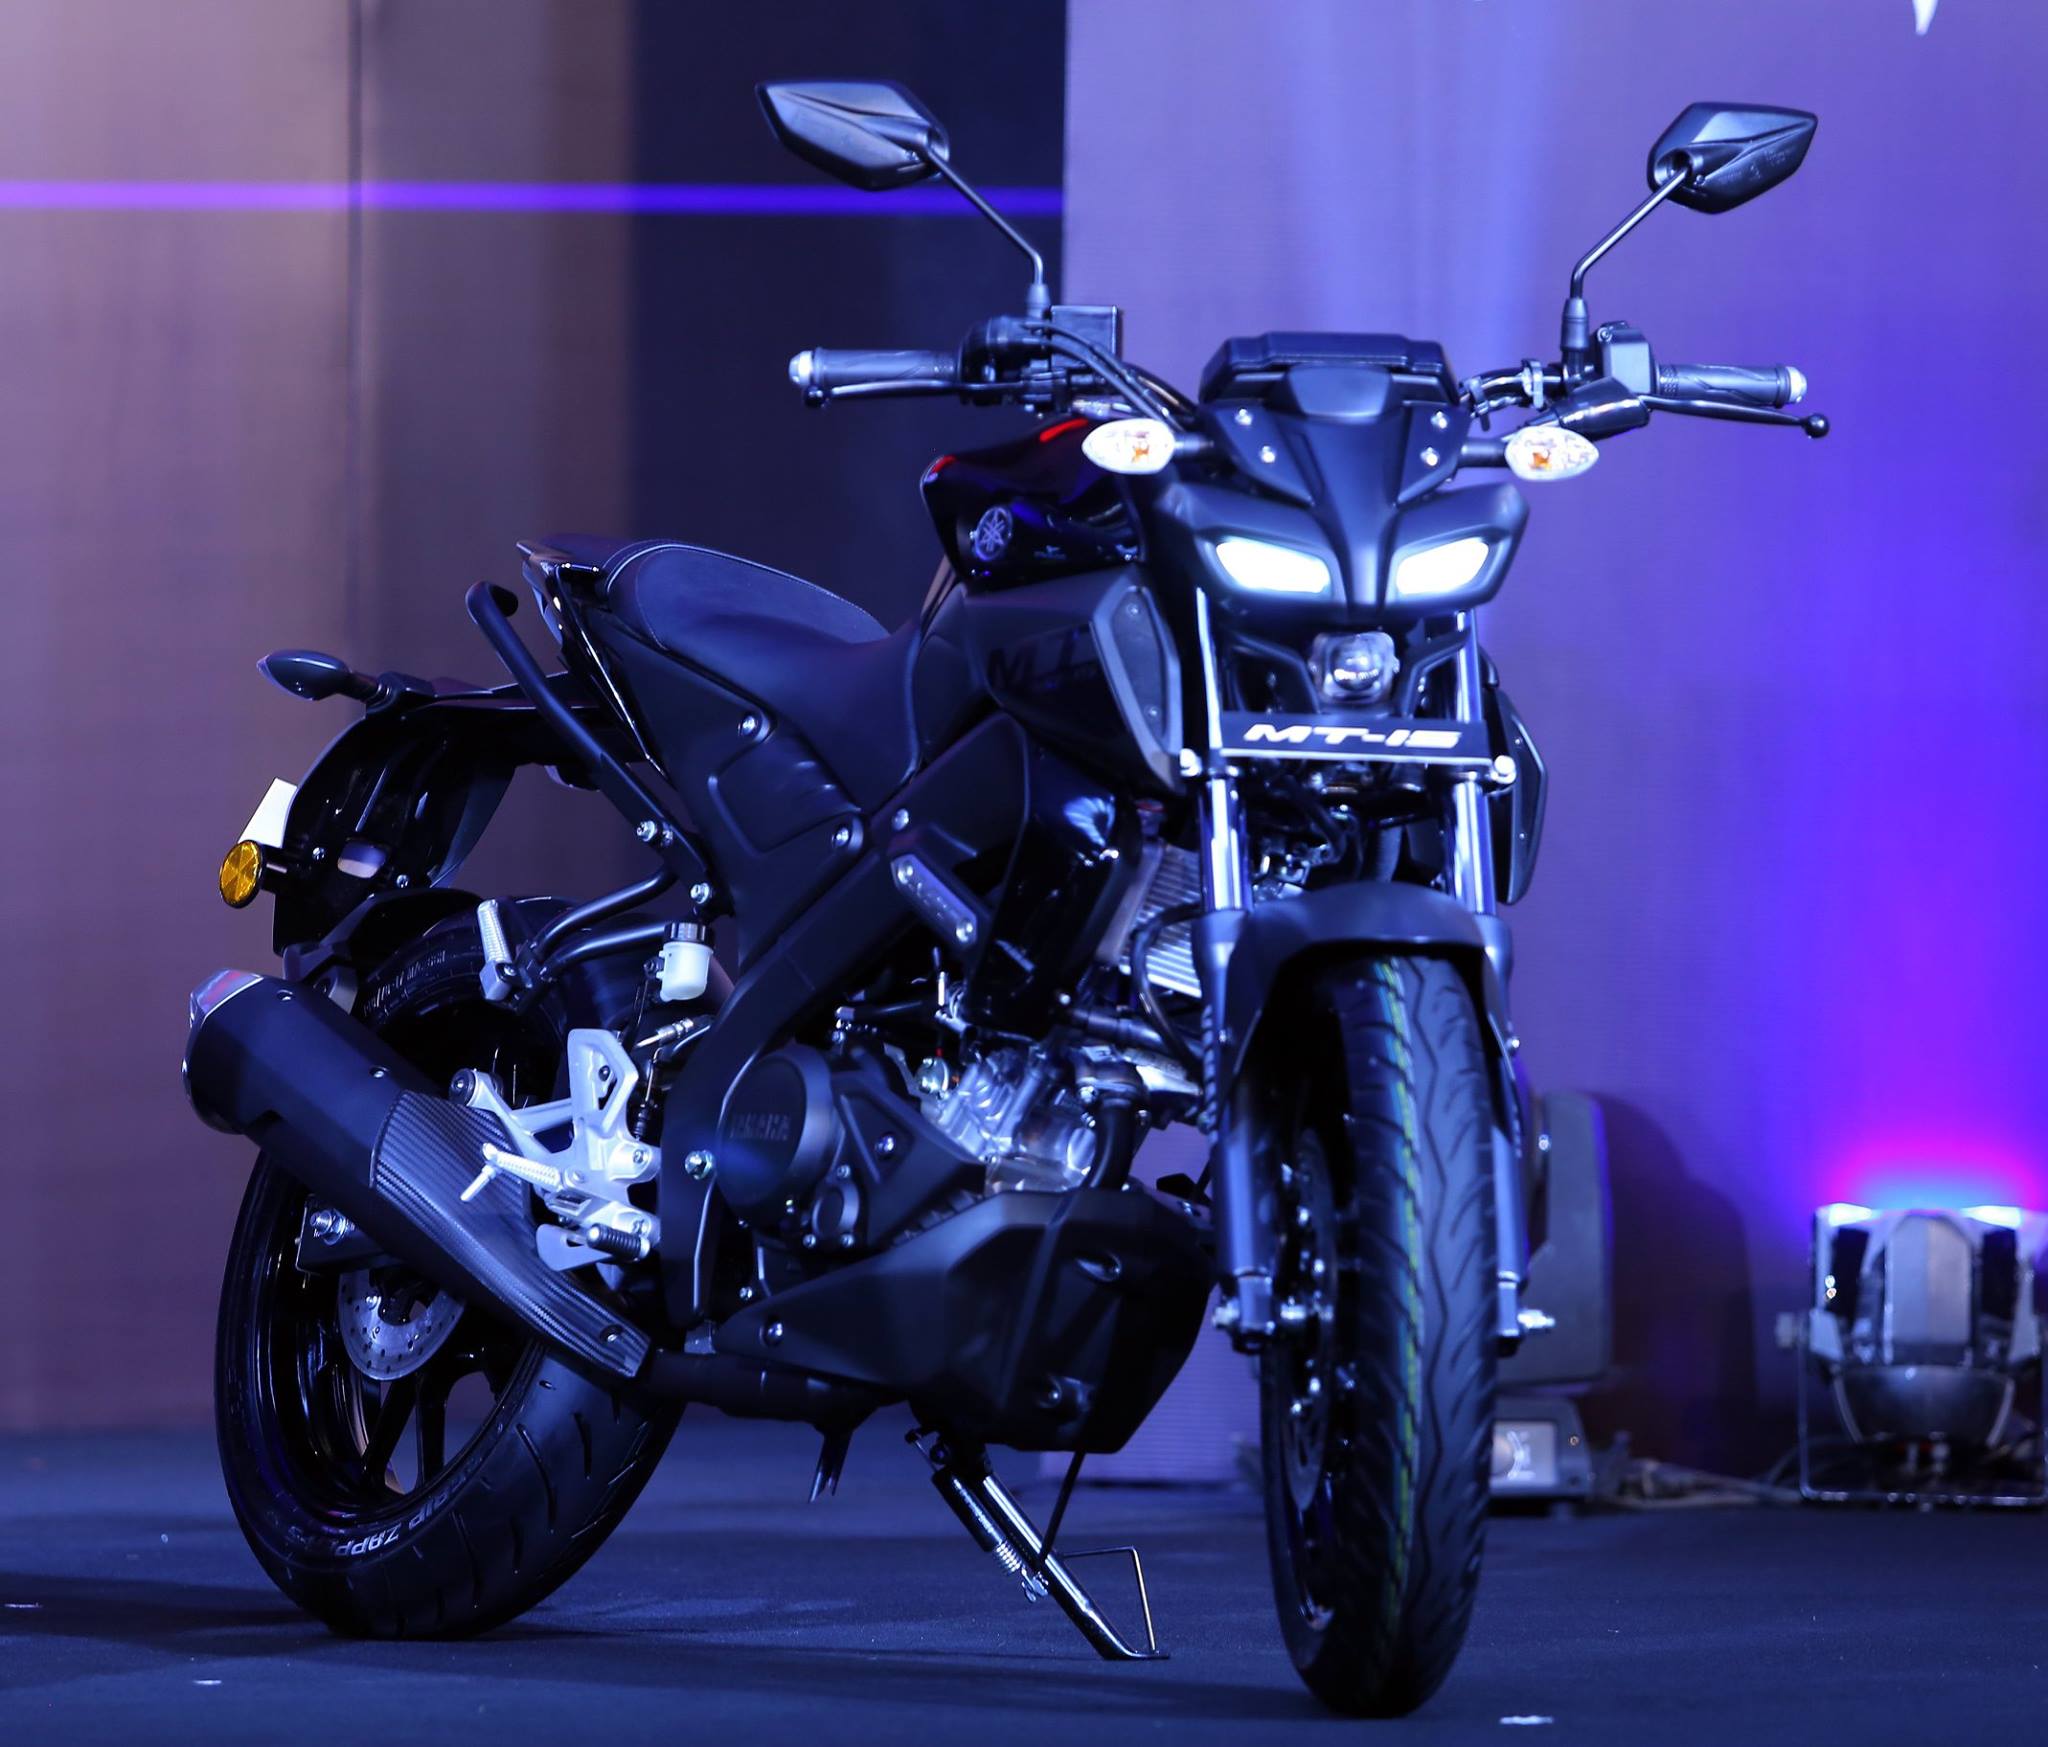 Yamaha MT-15 Price in Nepal, Images, Specifications, Features